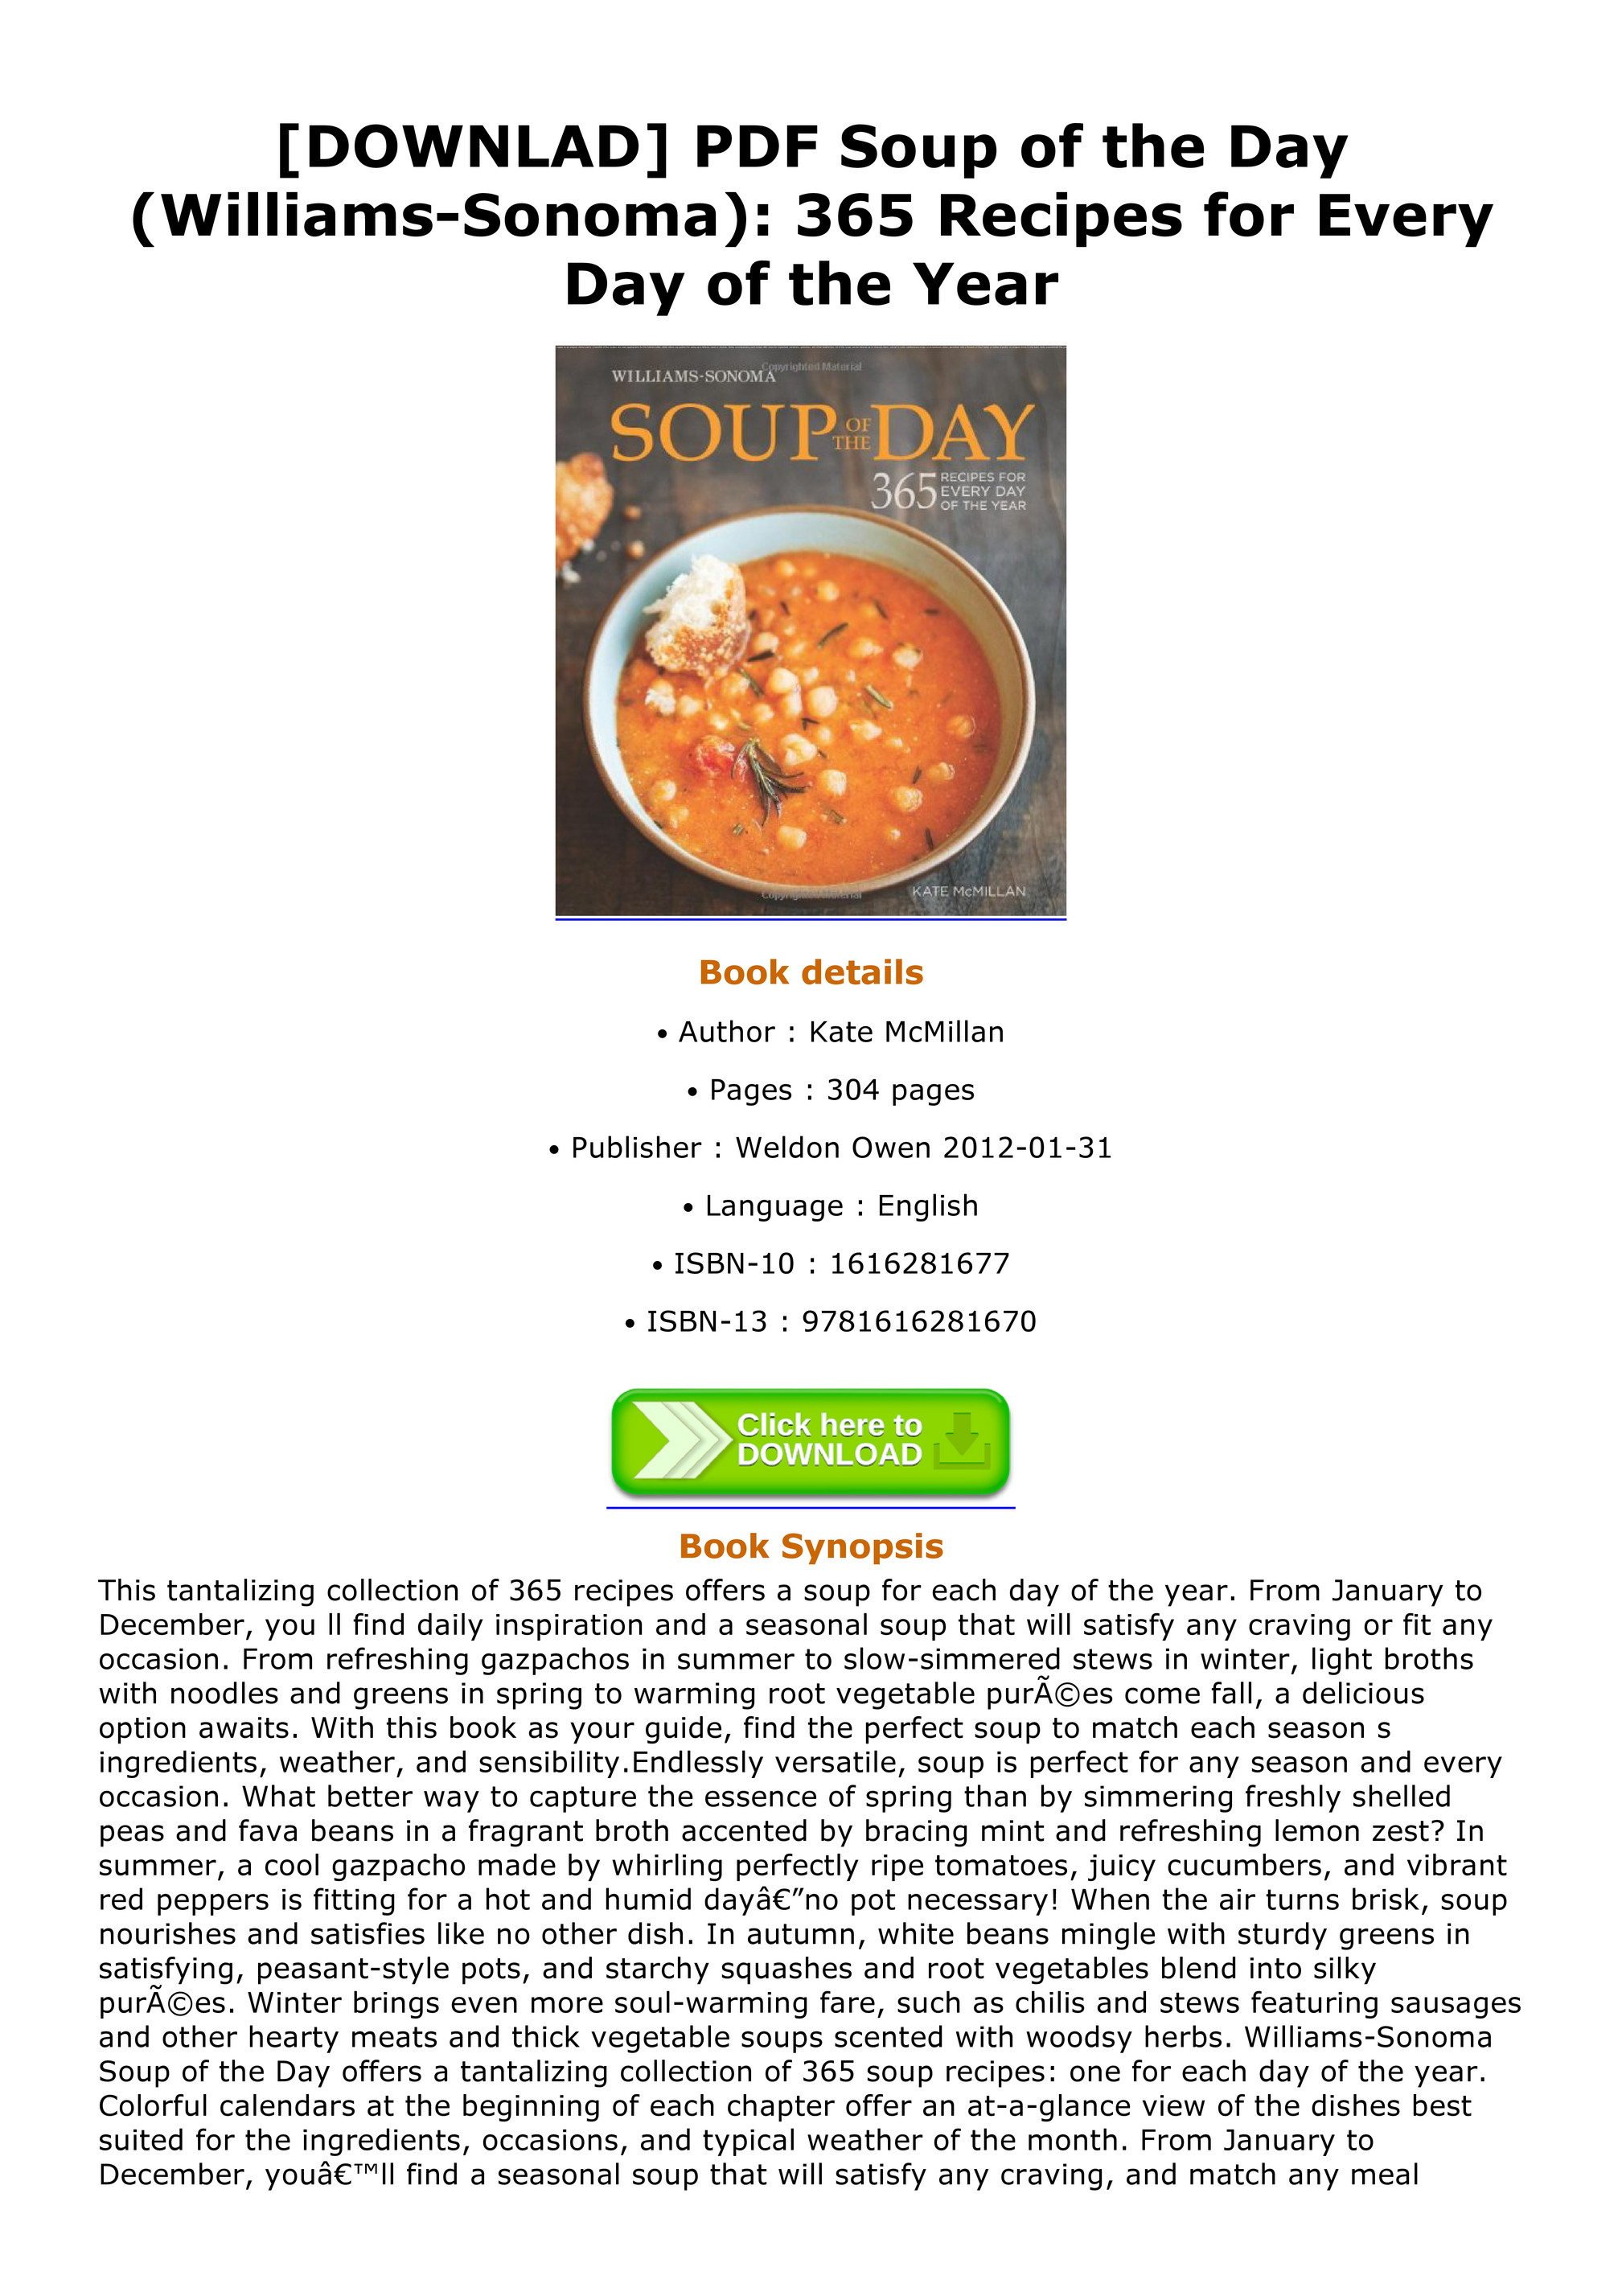 ‎Williams-Sonoma Soup of the Day